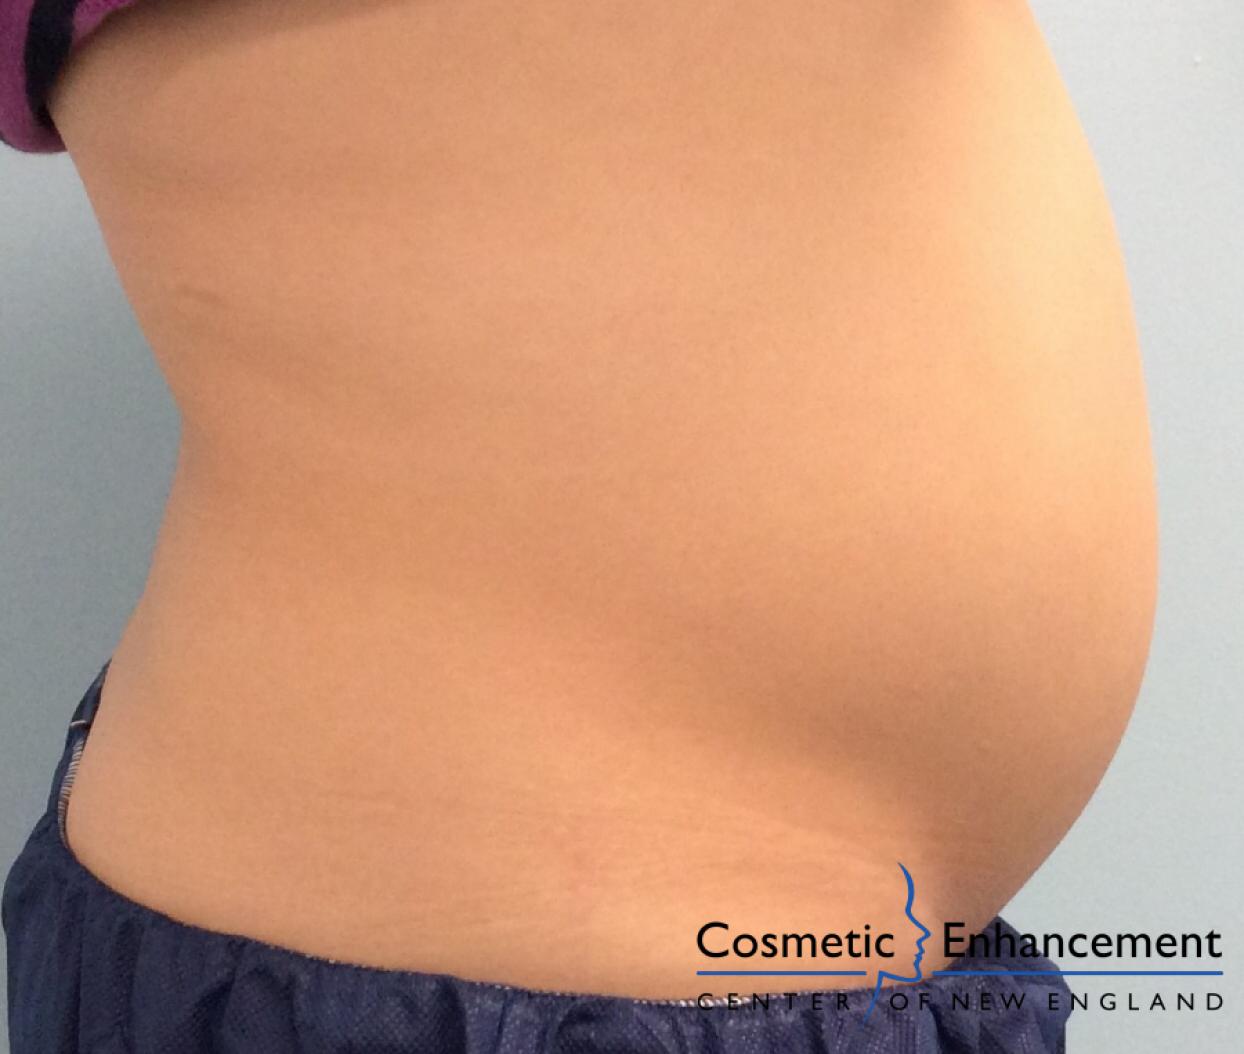 CoolSculpting®: Patient 6 - Before and After 2